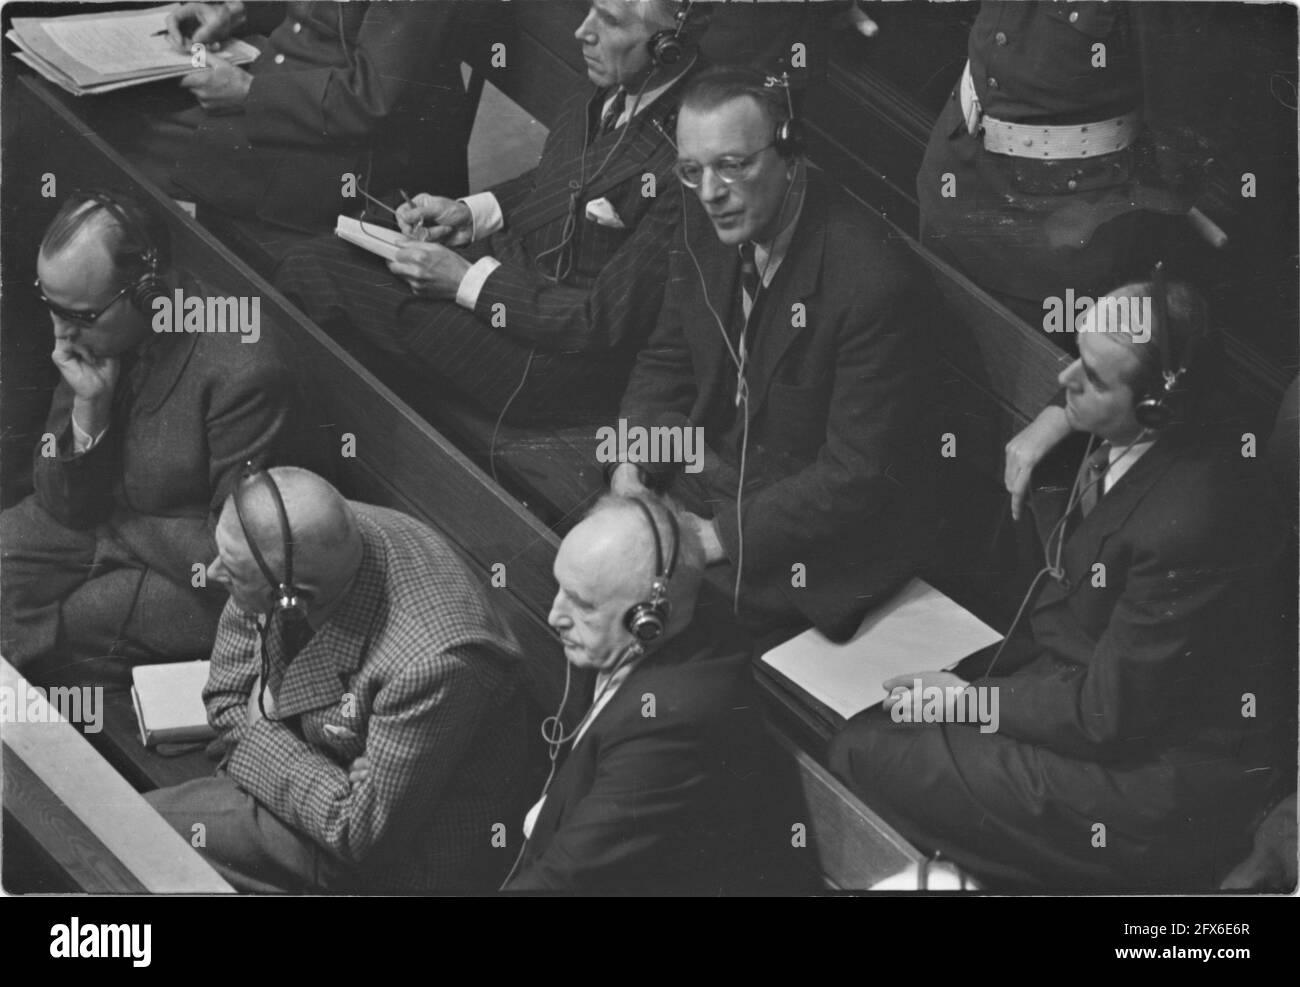 The Nuremberg trial of leaders of the Nazi regime. Right of center (with glasses) Arthur Seyss-Inquart, formerly Reich Commissioner in occupied Netherlands. To his right Albert Speer, December 4, 1945, war criminals, trials, justice, second world war, The Netherlands, 20th century press agency photo, news to remember, documentary, historic photography 1945-1990, visual stories, human history of the Twentieth Century, capturing moments in time Stock Photo